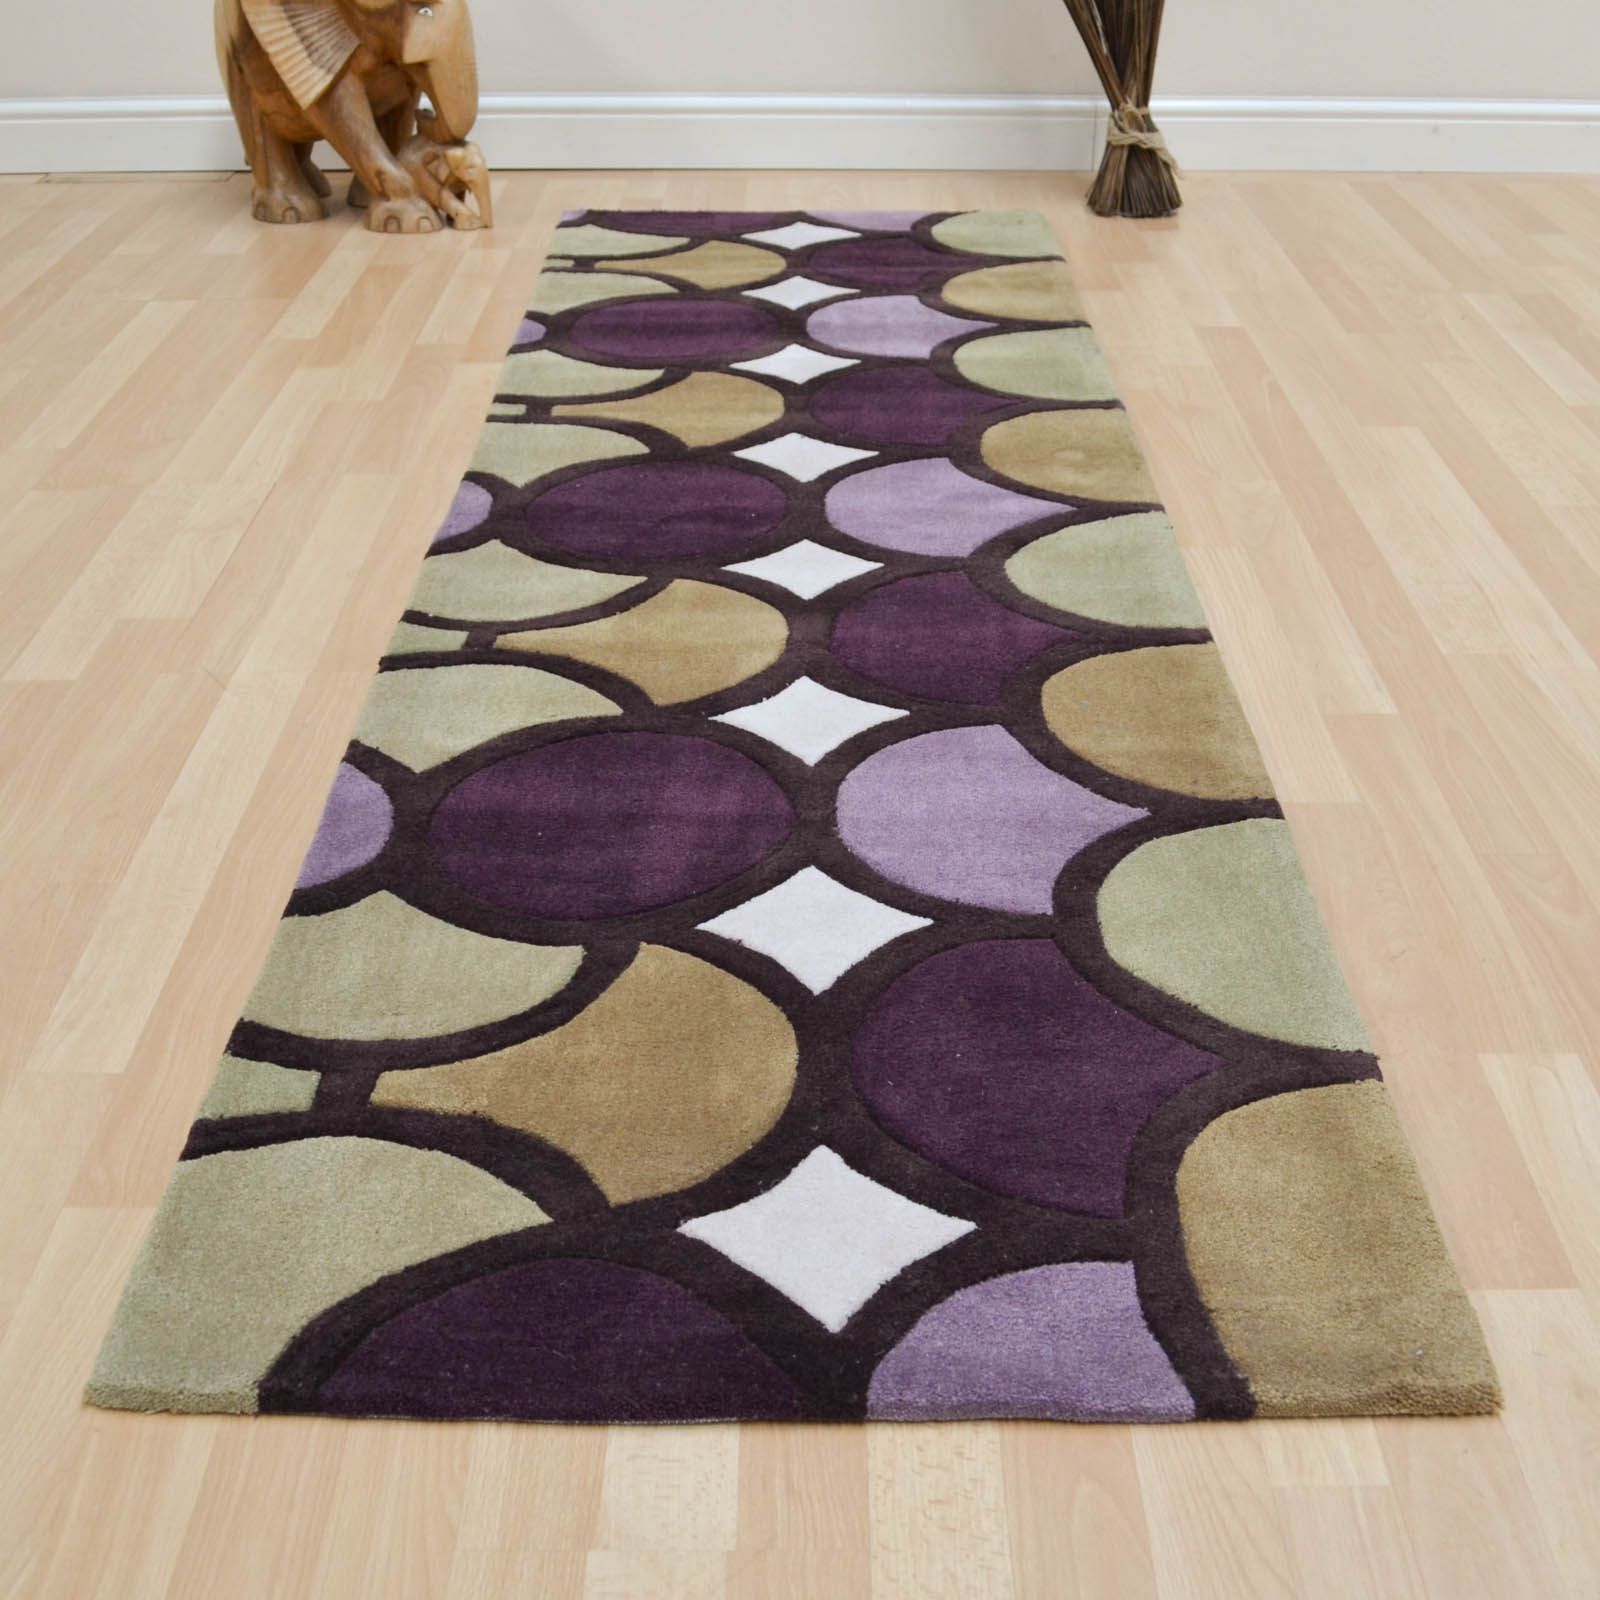 Cozy Hallway Runner Rugs Uk 100 Hallway Runner Rugs Uk Very Long Intended For Hall Runners And Matching Rugs 